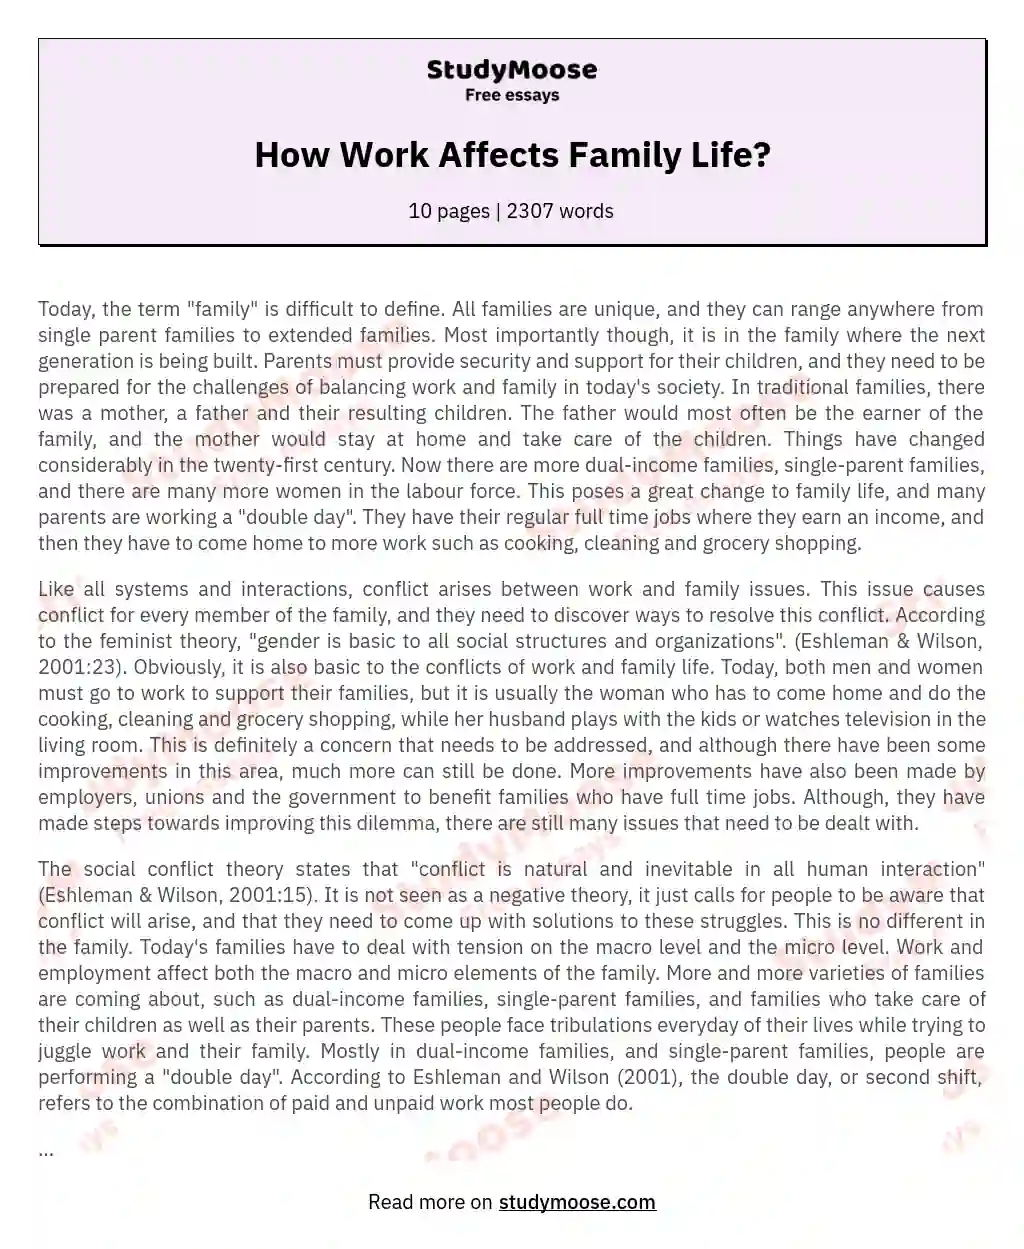 How Work Affects Family Life? essay